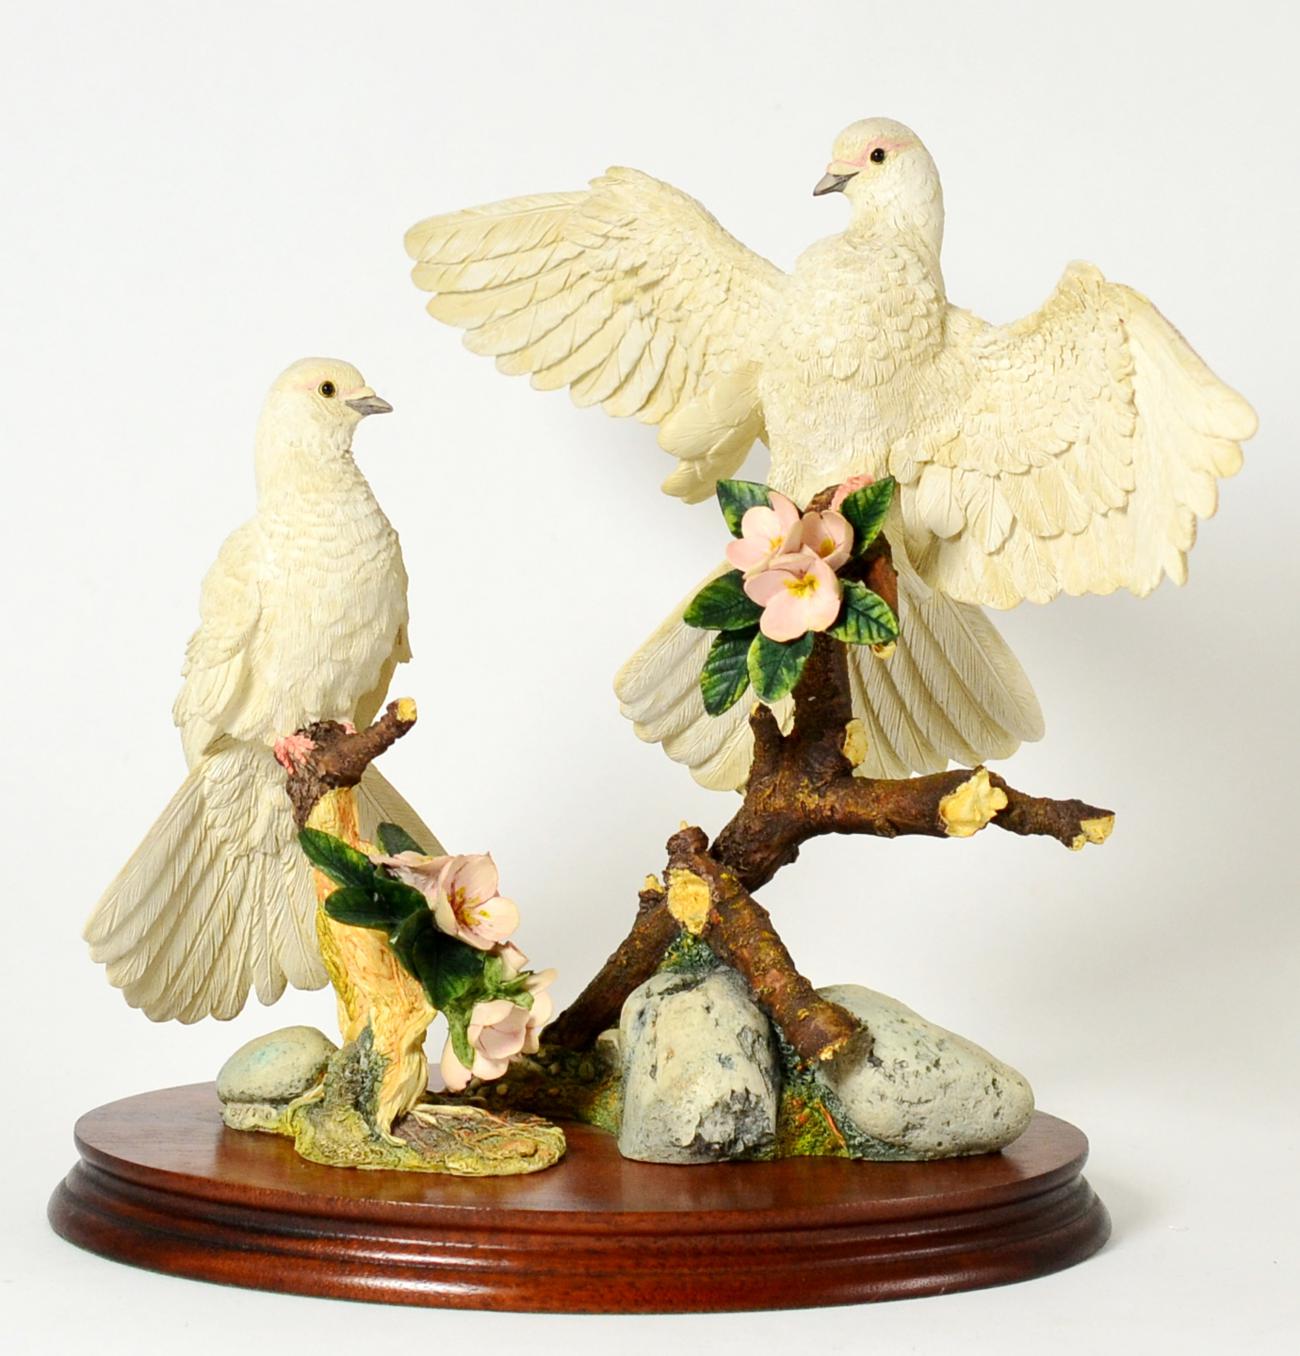 Border Fine Arts 'Fantail Doves' (Pair), model No. WB73 by Russell Willis, limited edition 139/